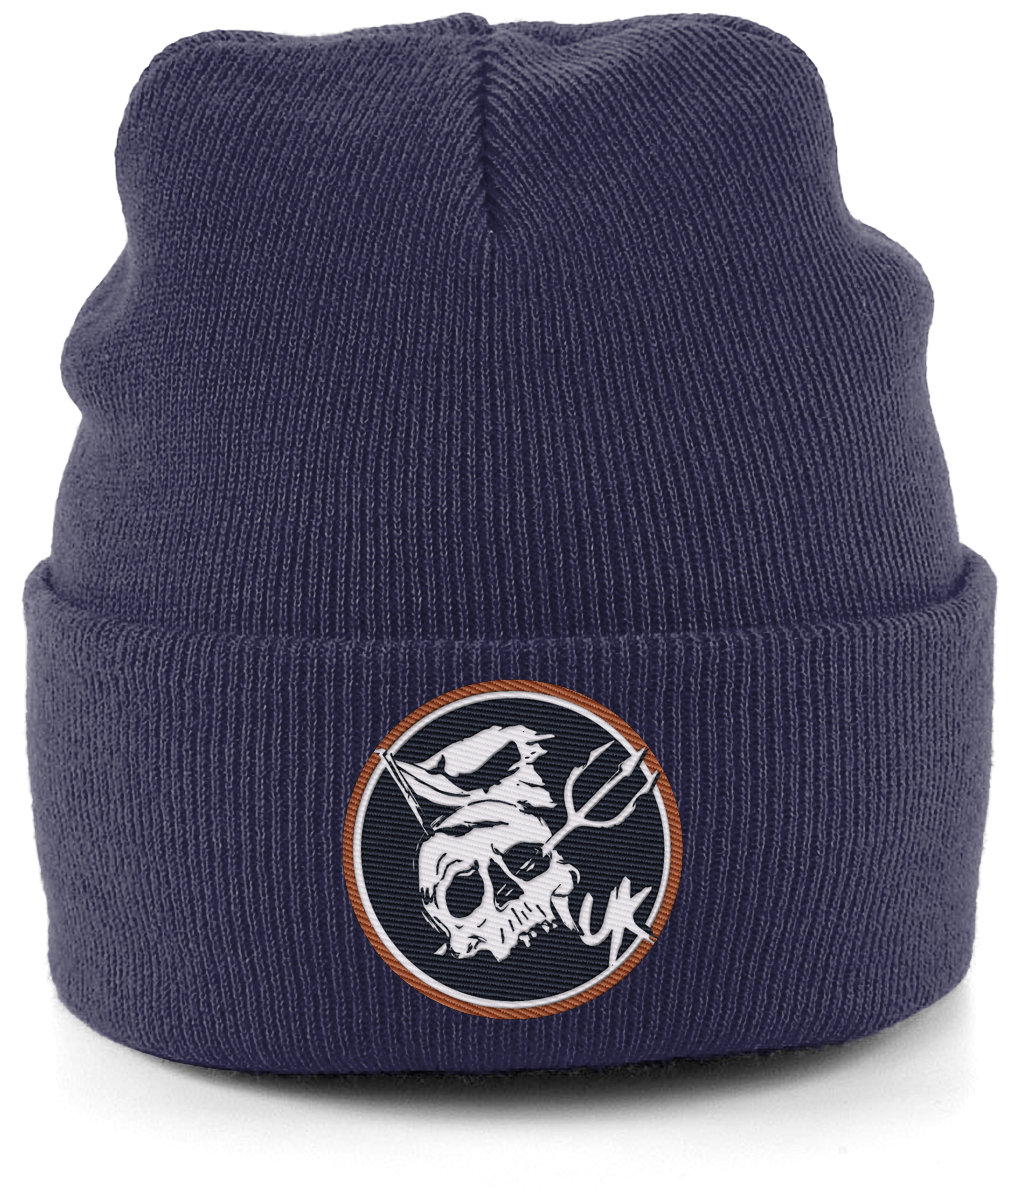 Neptune's Pirate's UK Badge Embroidered Beanie - Captain Paul Watson Foundation (t/a Neptune's Pirates)